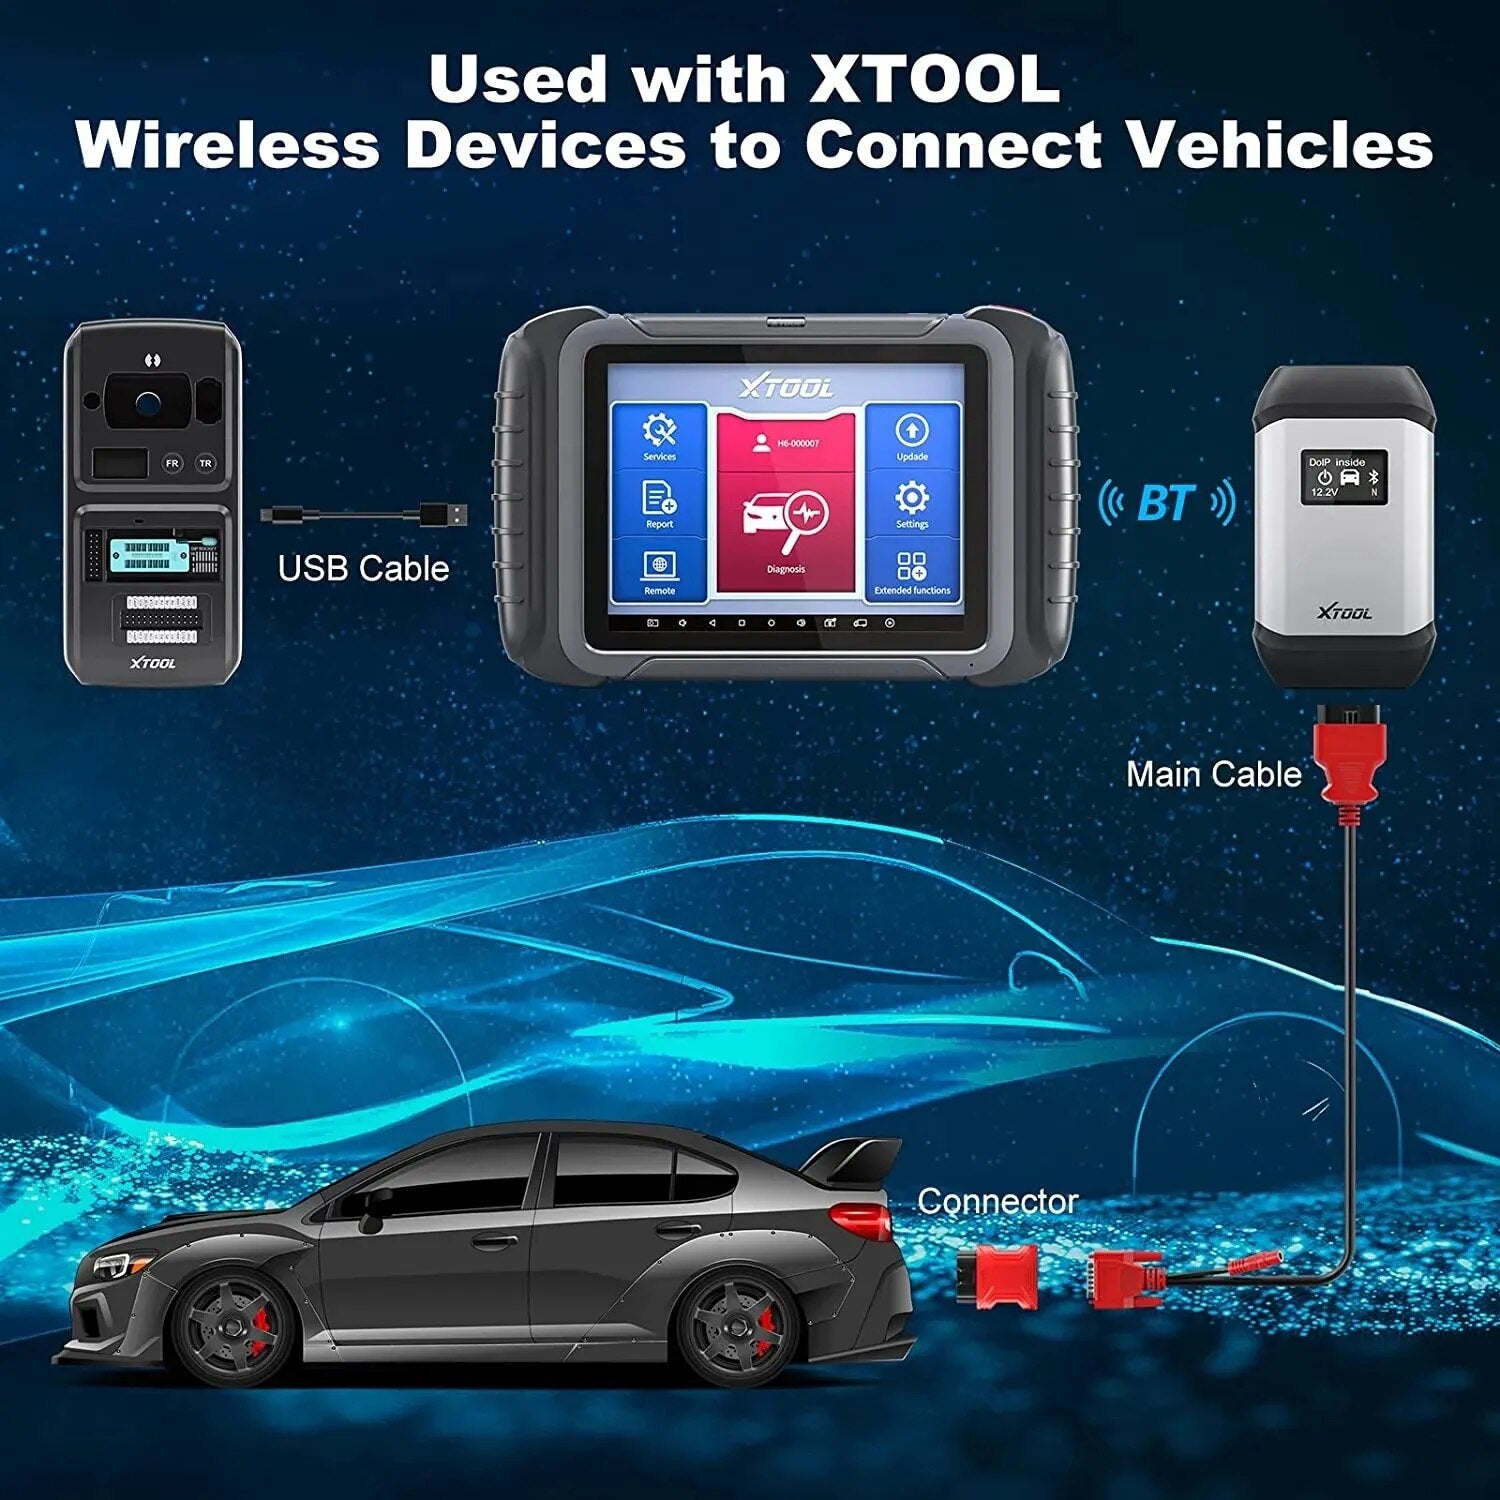 XTOOL KC501 Professional Car Key Programming OBD2 Sacnner Chip Programmer ECU Reader For Benz Infrared Key Works With X100 PAD3